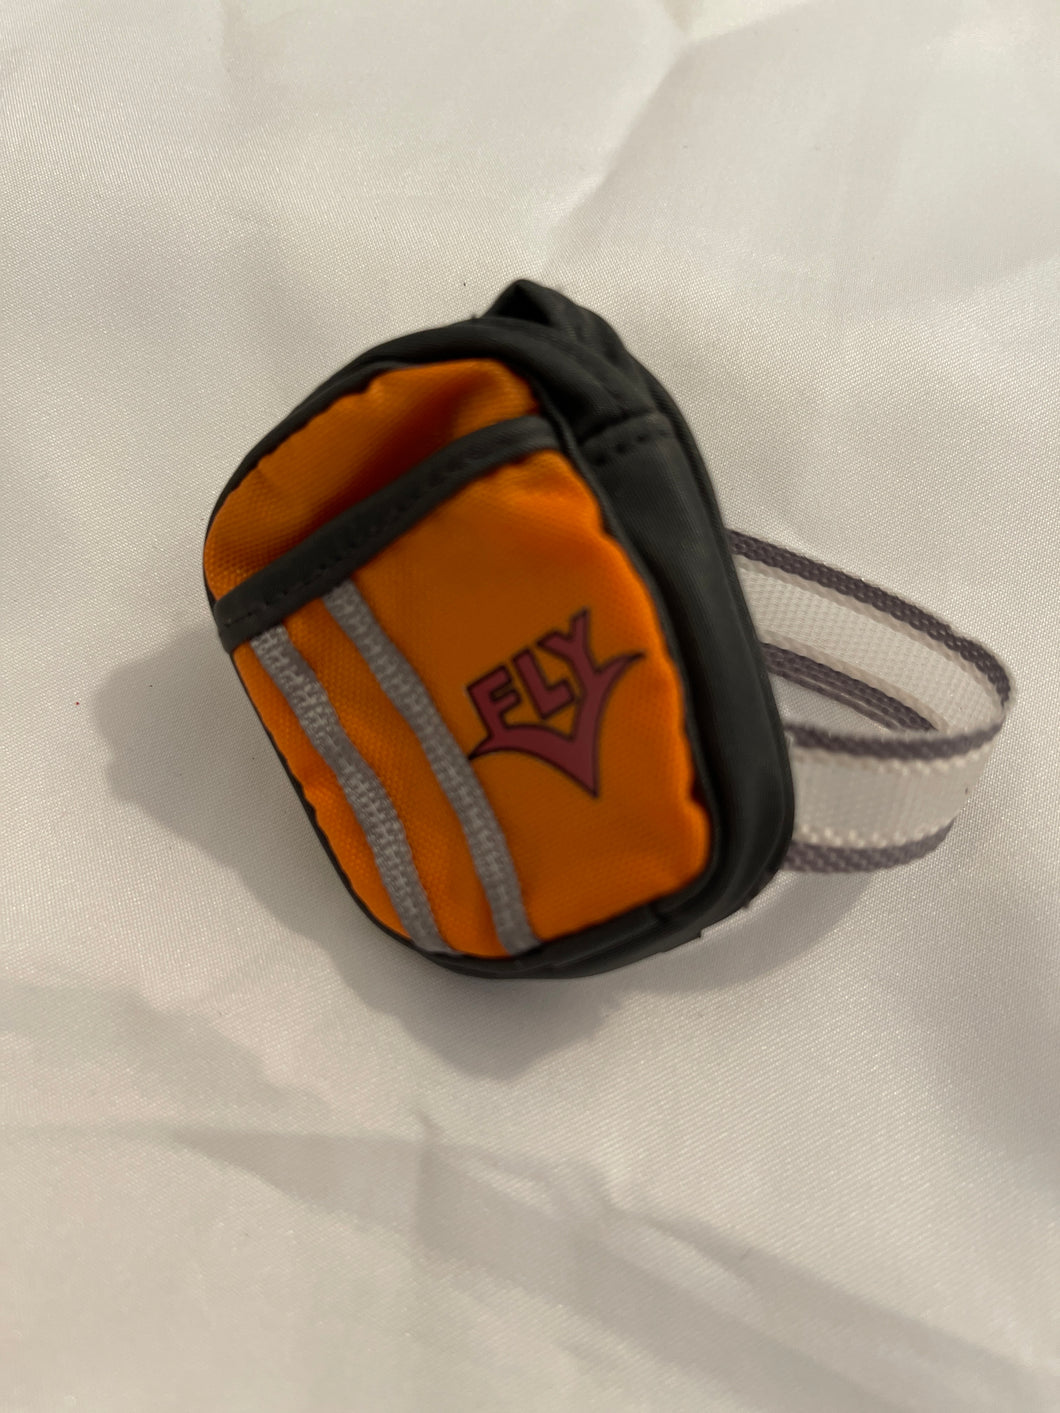 Bratz Doll Purse #1 Orange Gray FLY Backpack (Pre-owned)